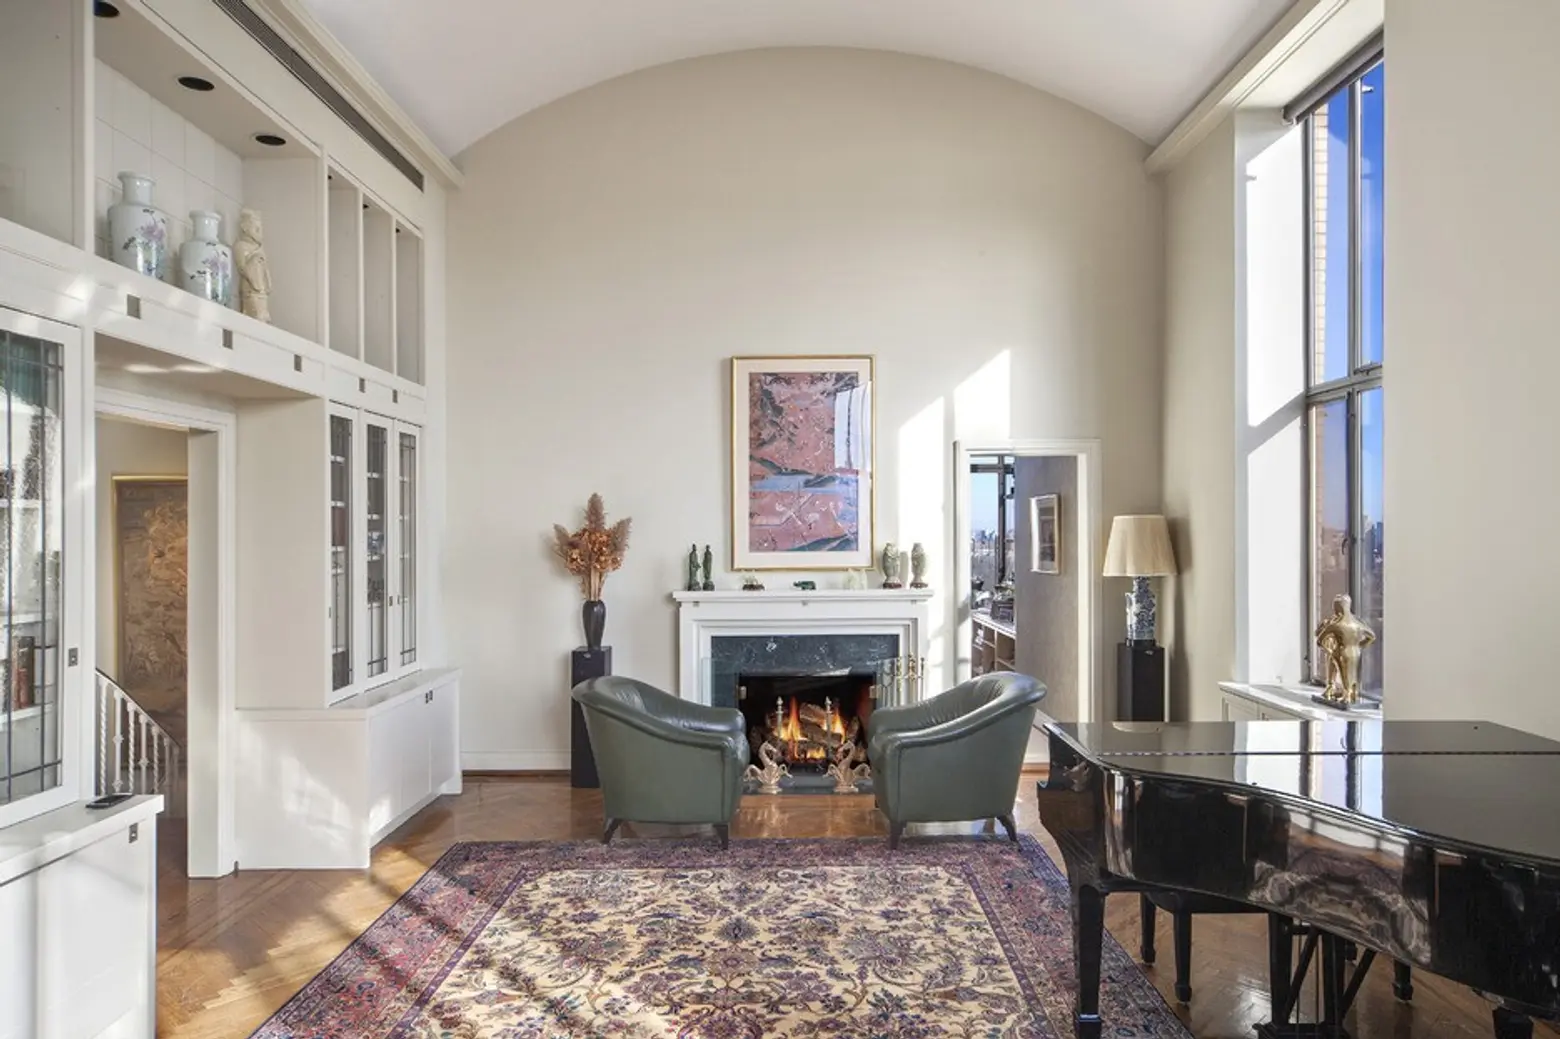 Elegant Central Park West penthouse hits the market for the first time in 30 years, asks $20M